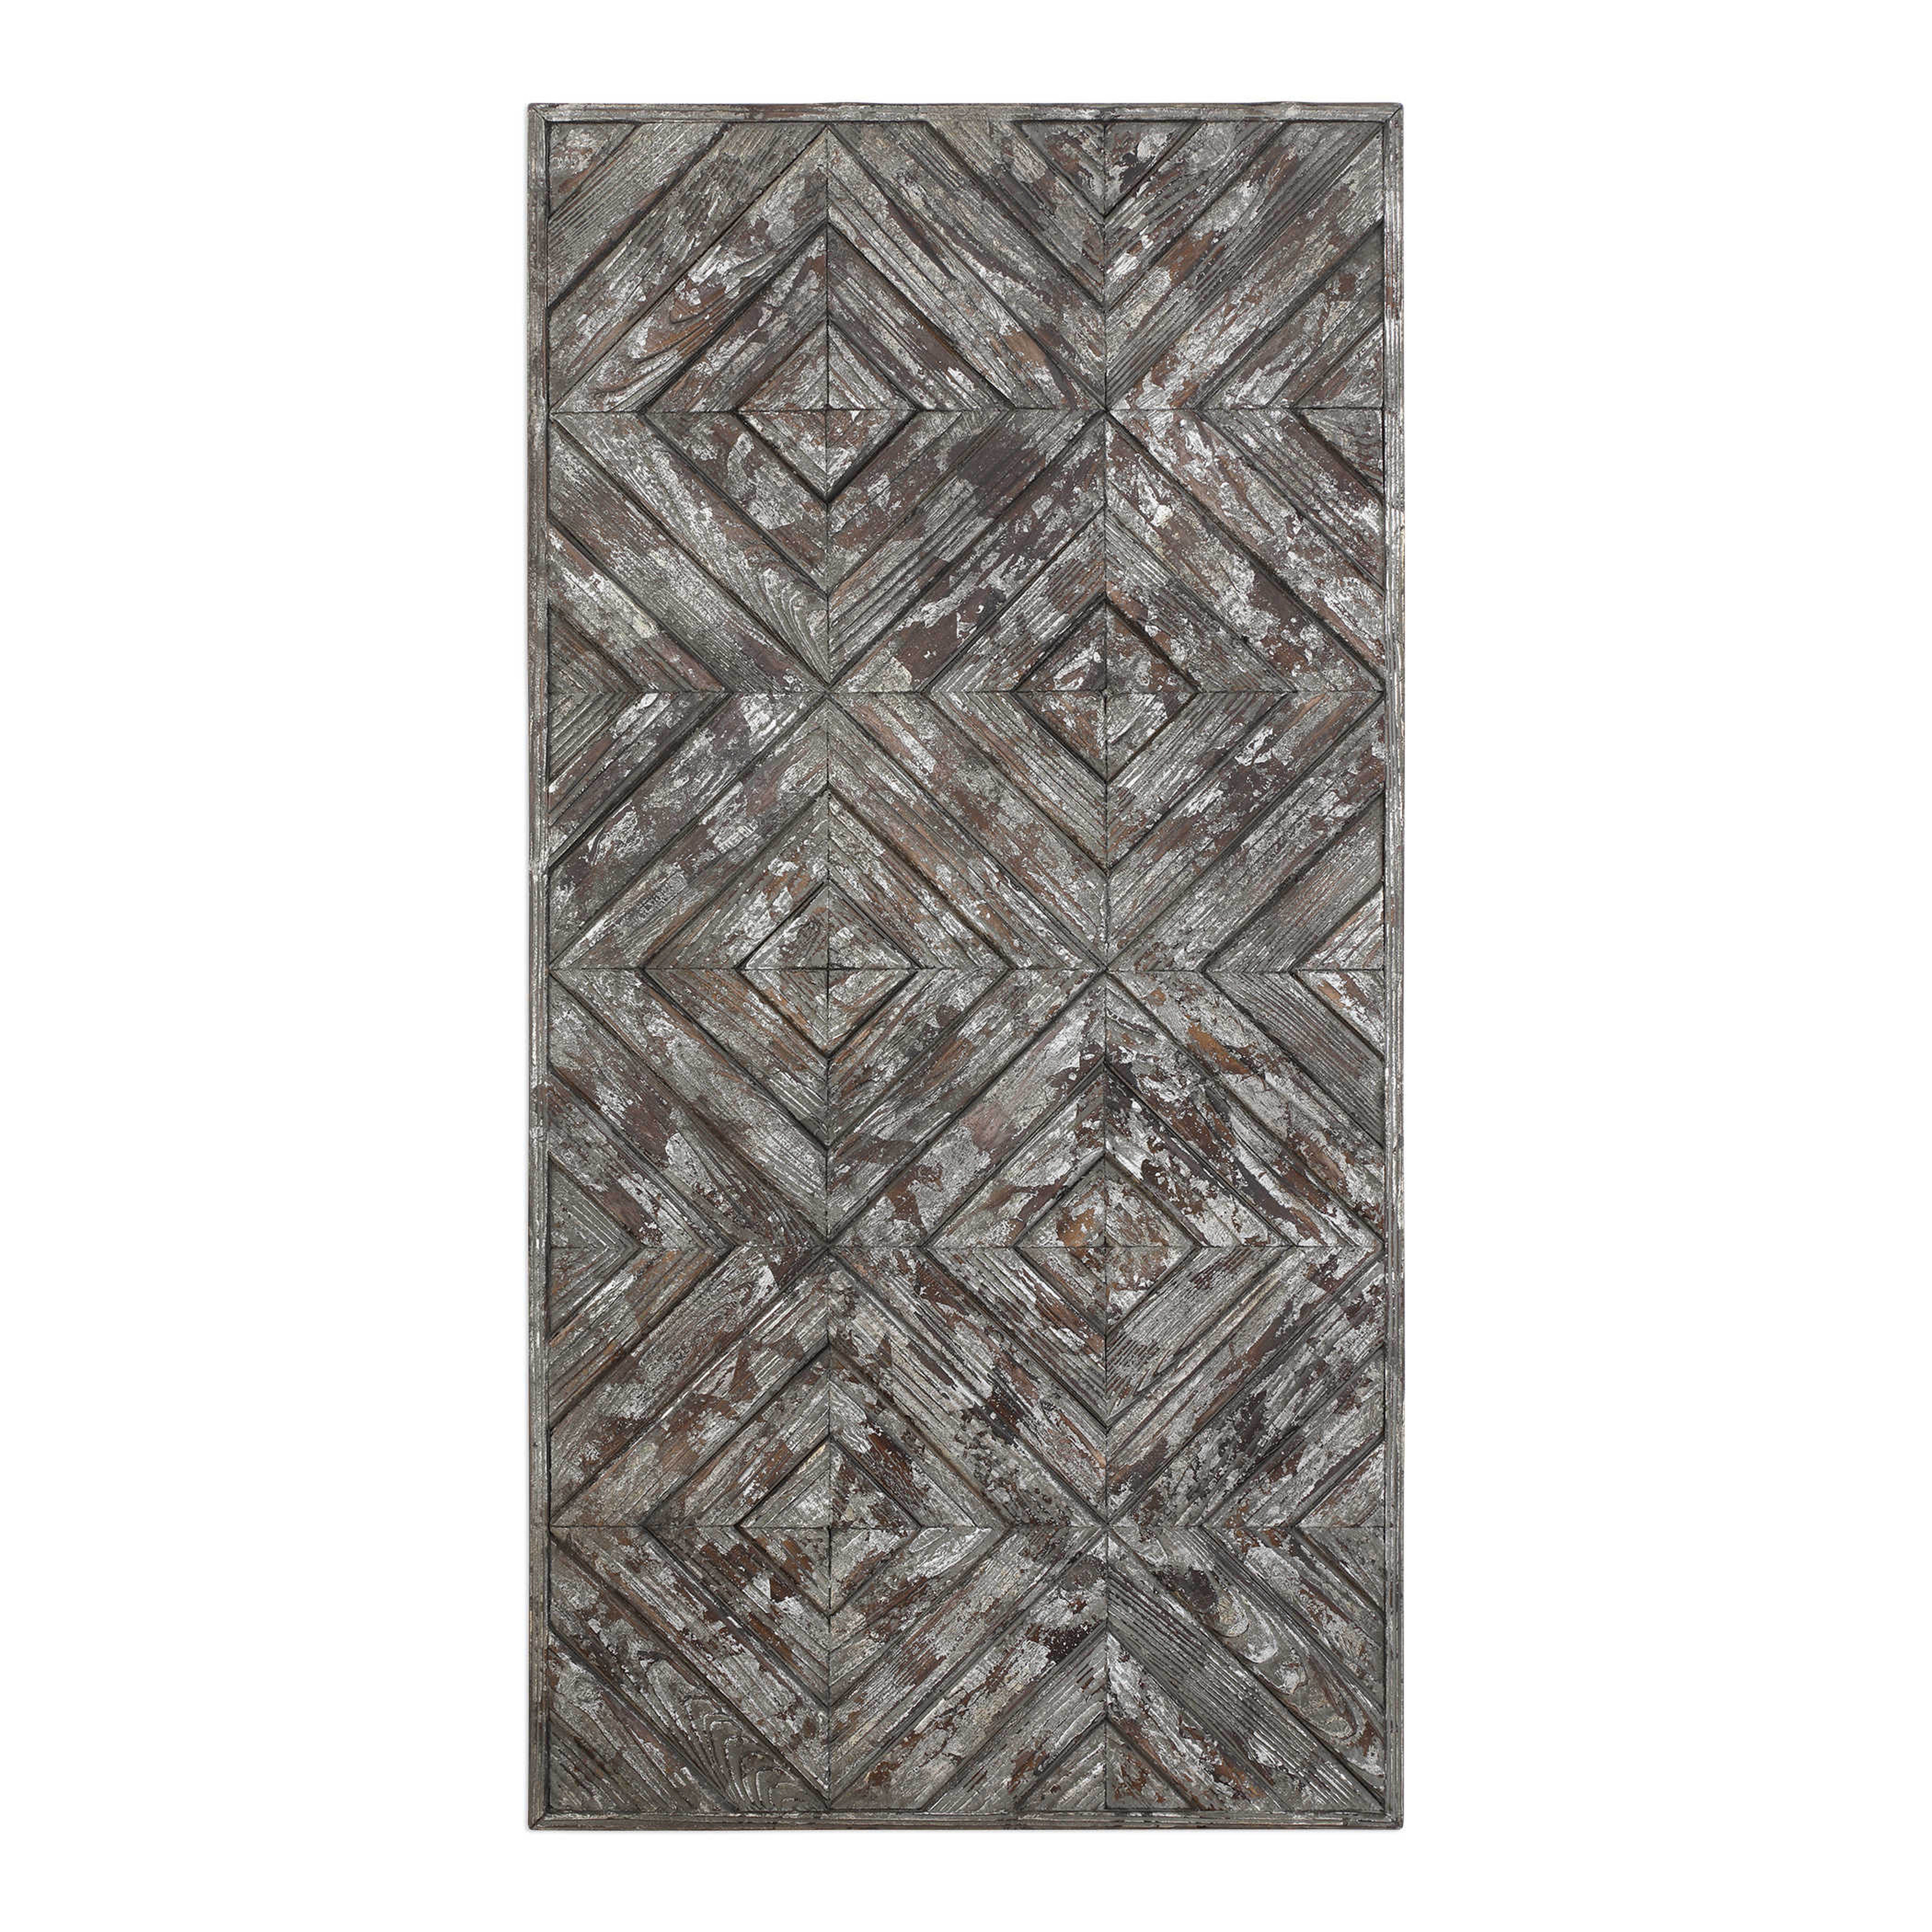 Roland Wood Wall Panel - Hudsonhill Foundry